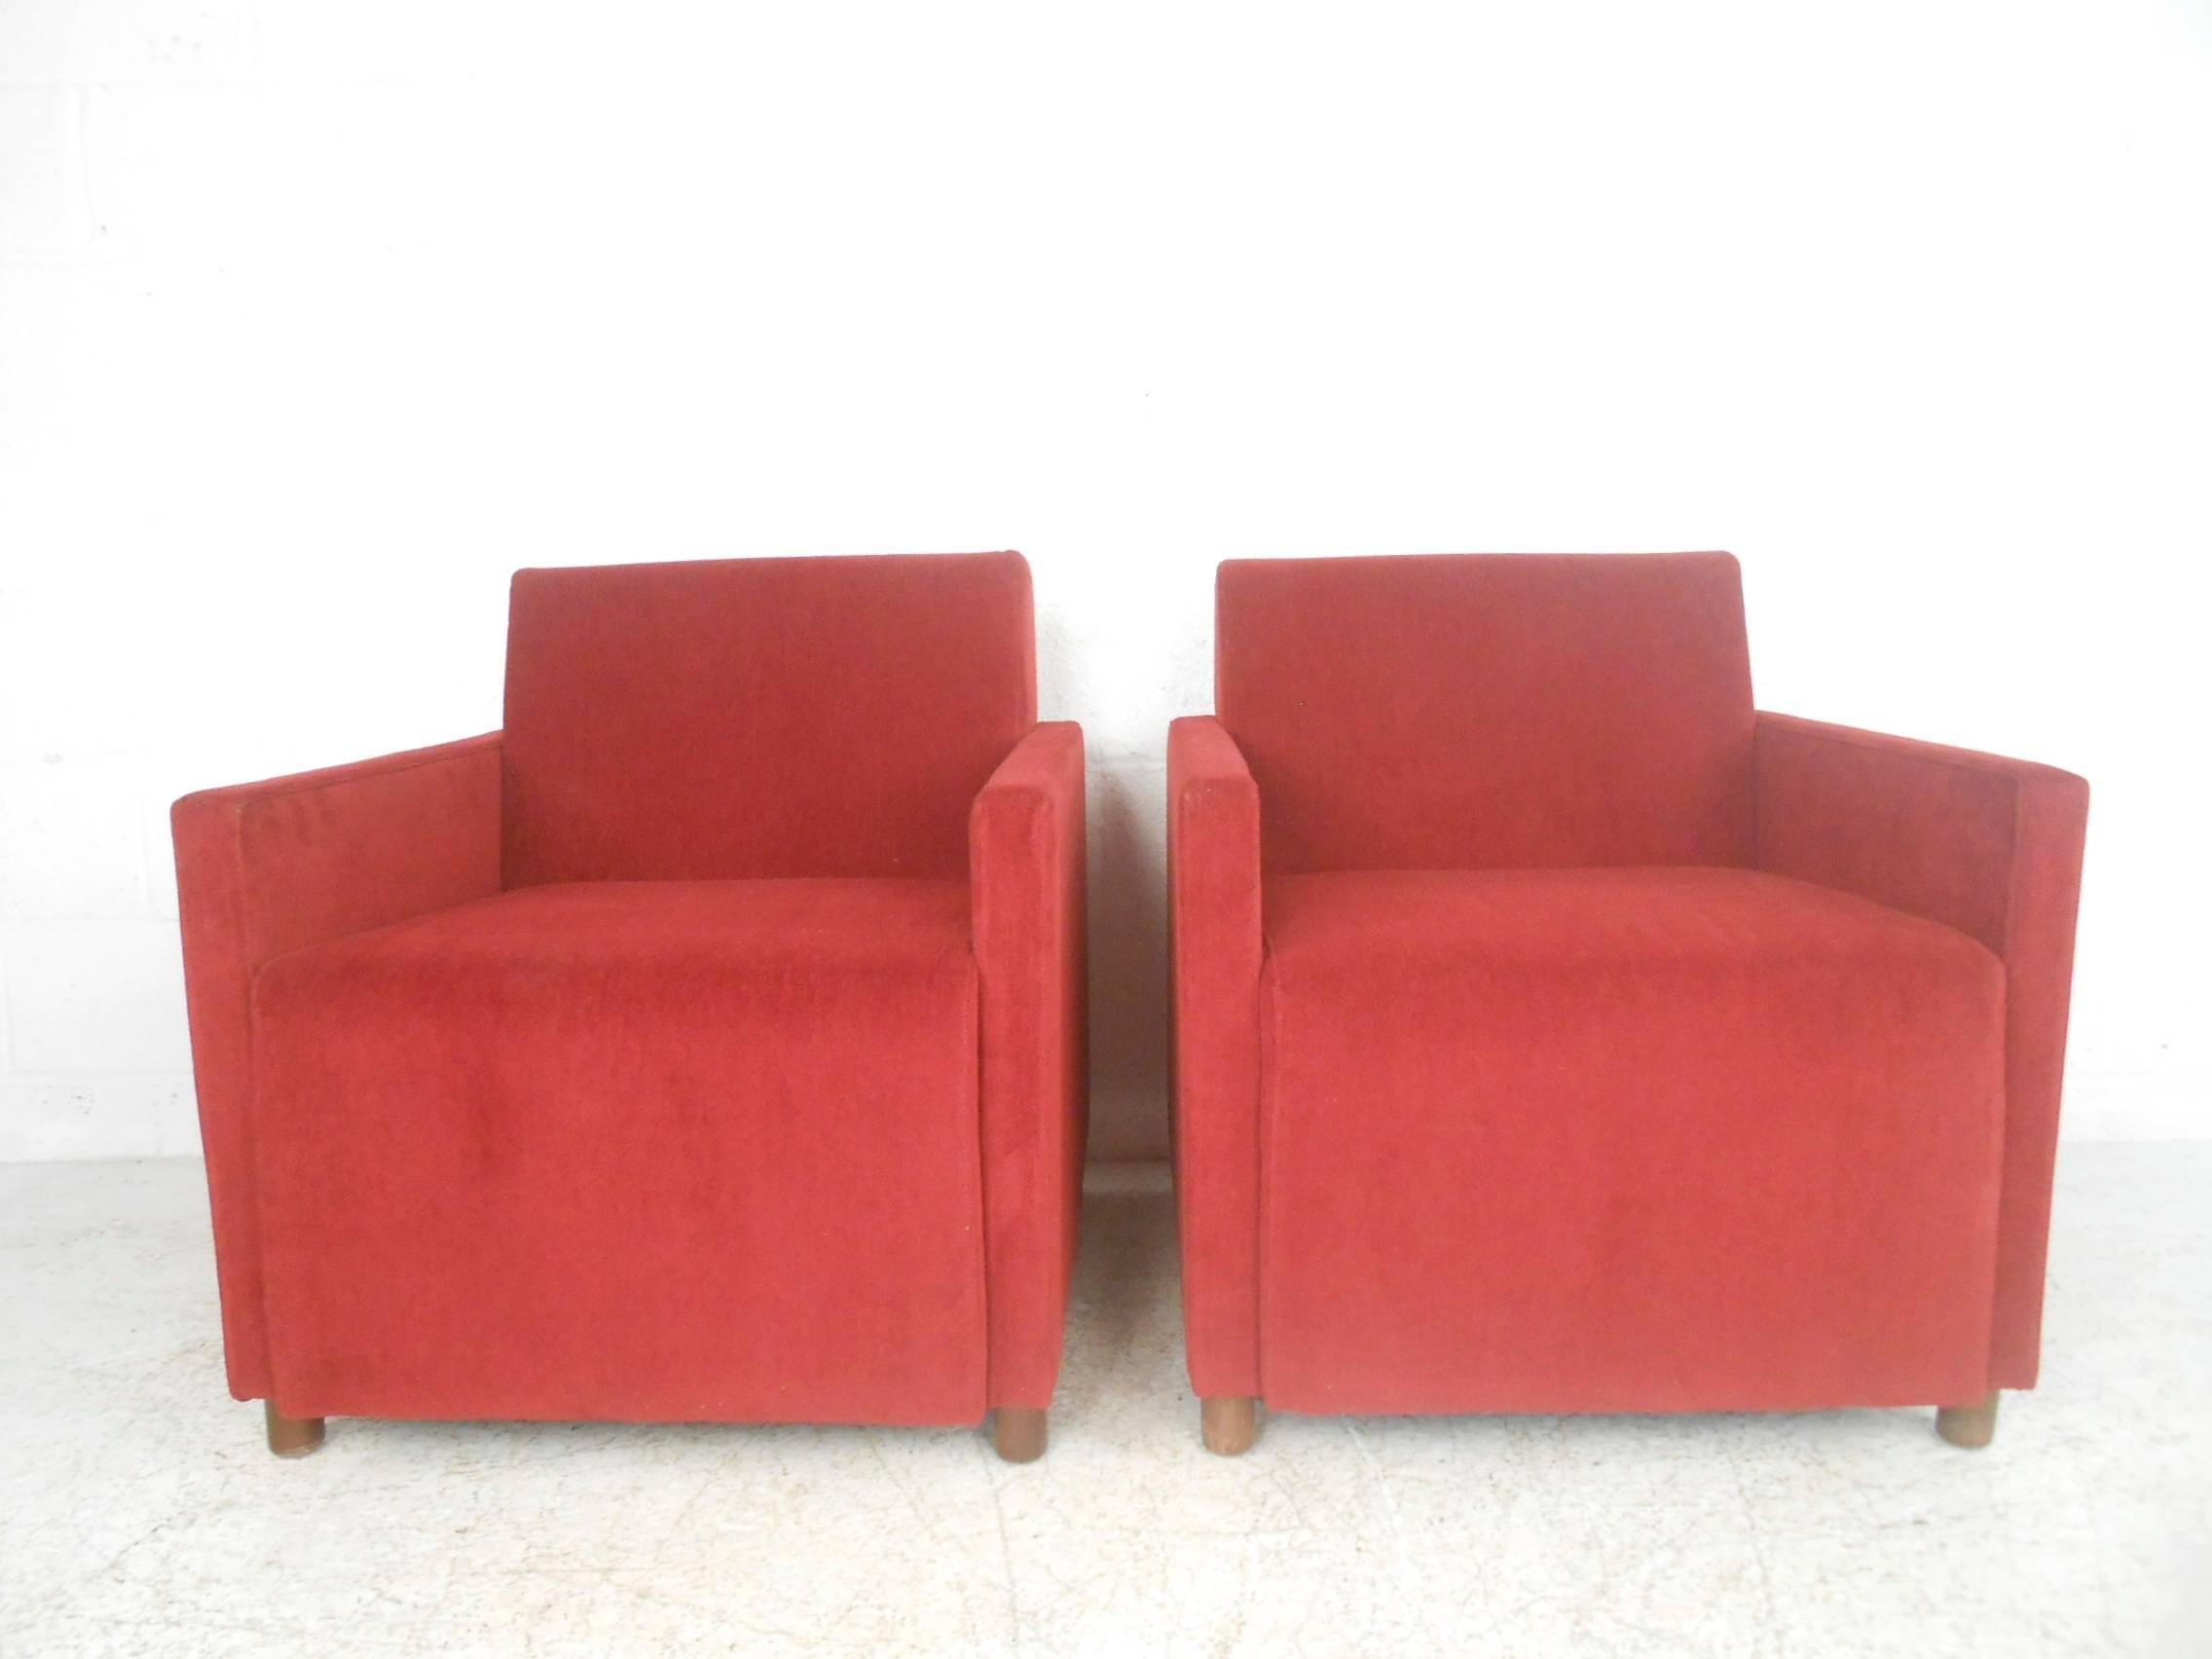 This beautiful pair of vintage modern club chairs feature plush red upholstery and sturdy walnut legs. Stylish design with thick padded seating and low arm rests. The straight line cube design makes these extremely comfortable midcentury lounge